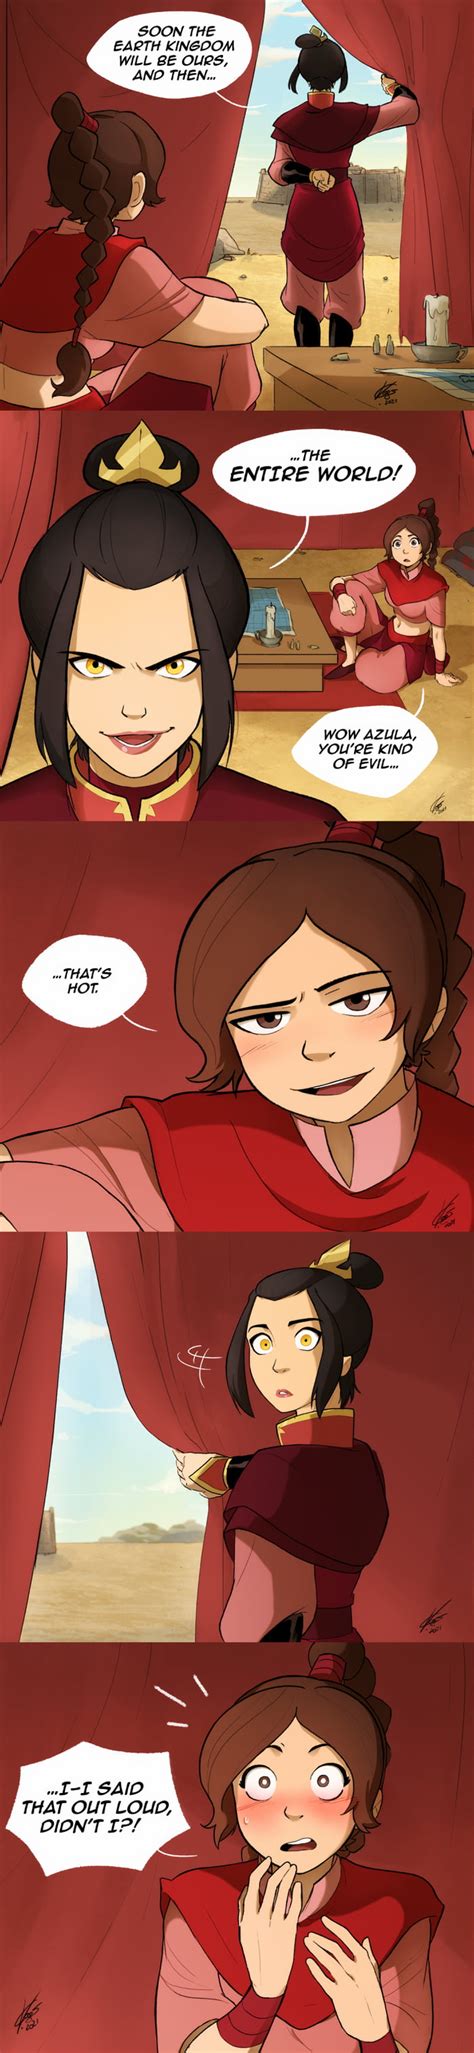 Azula,Zuko. Genre(s) Blowjob, Cartoon, Creampie, Fingering, Incest, Manga. Type . Manga . Tag(s) Black | White, Brother, Full Color, Kissing, Long Hair, Sister. Release . 2019. ... Free Porn Comics are provided and uploaded by 3rd party non affiliated registered members on this site. We take no responsibility for the content uploaded on this ...